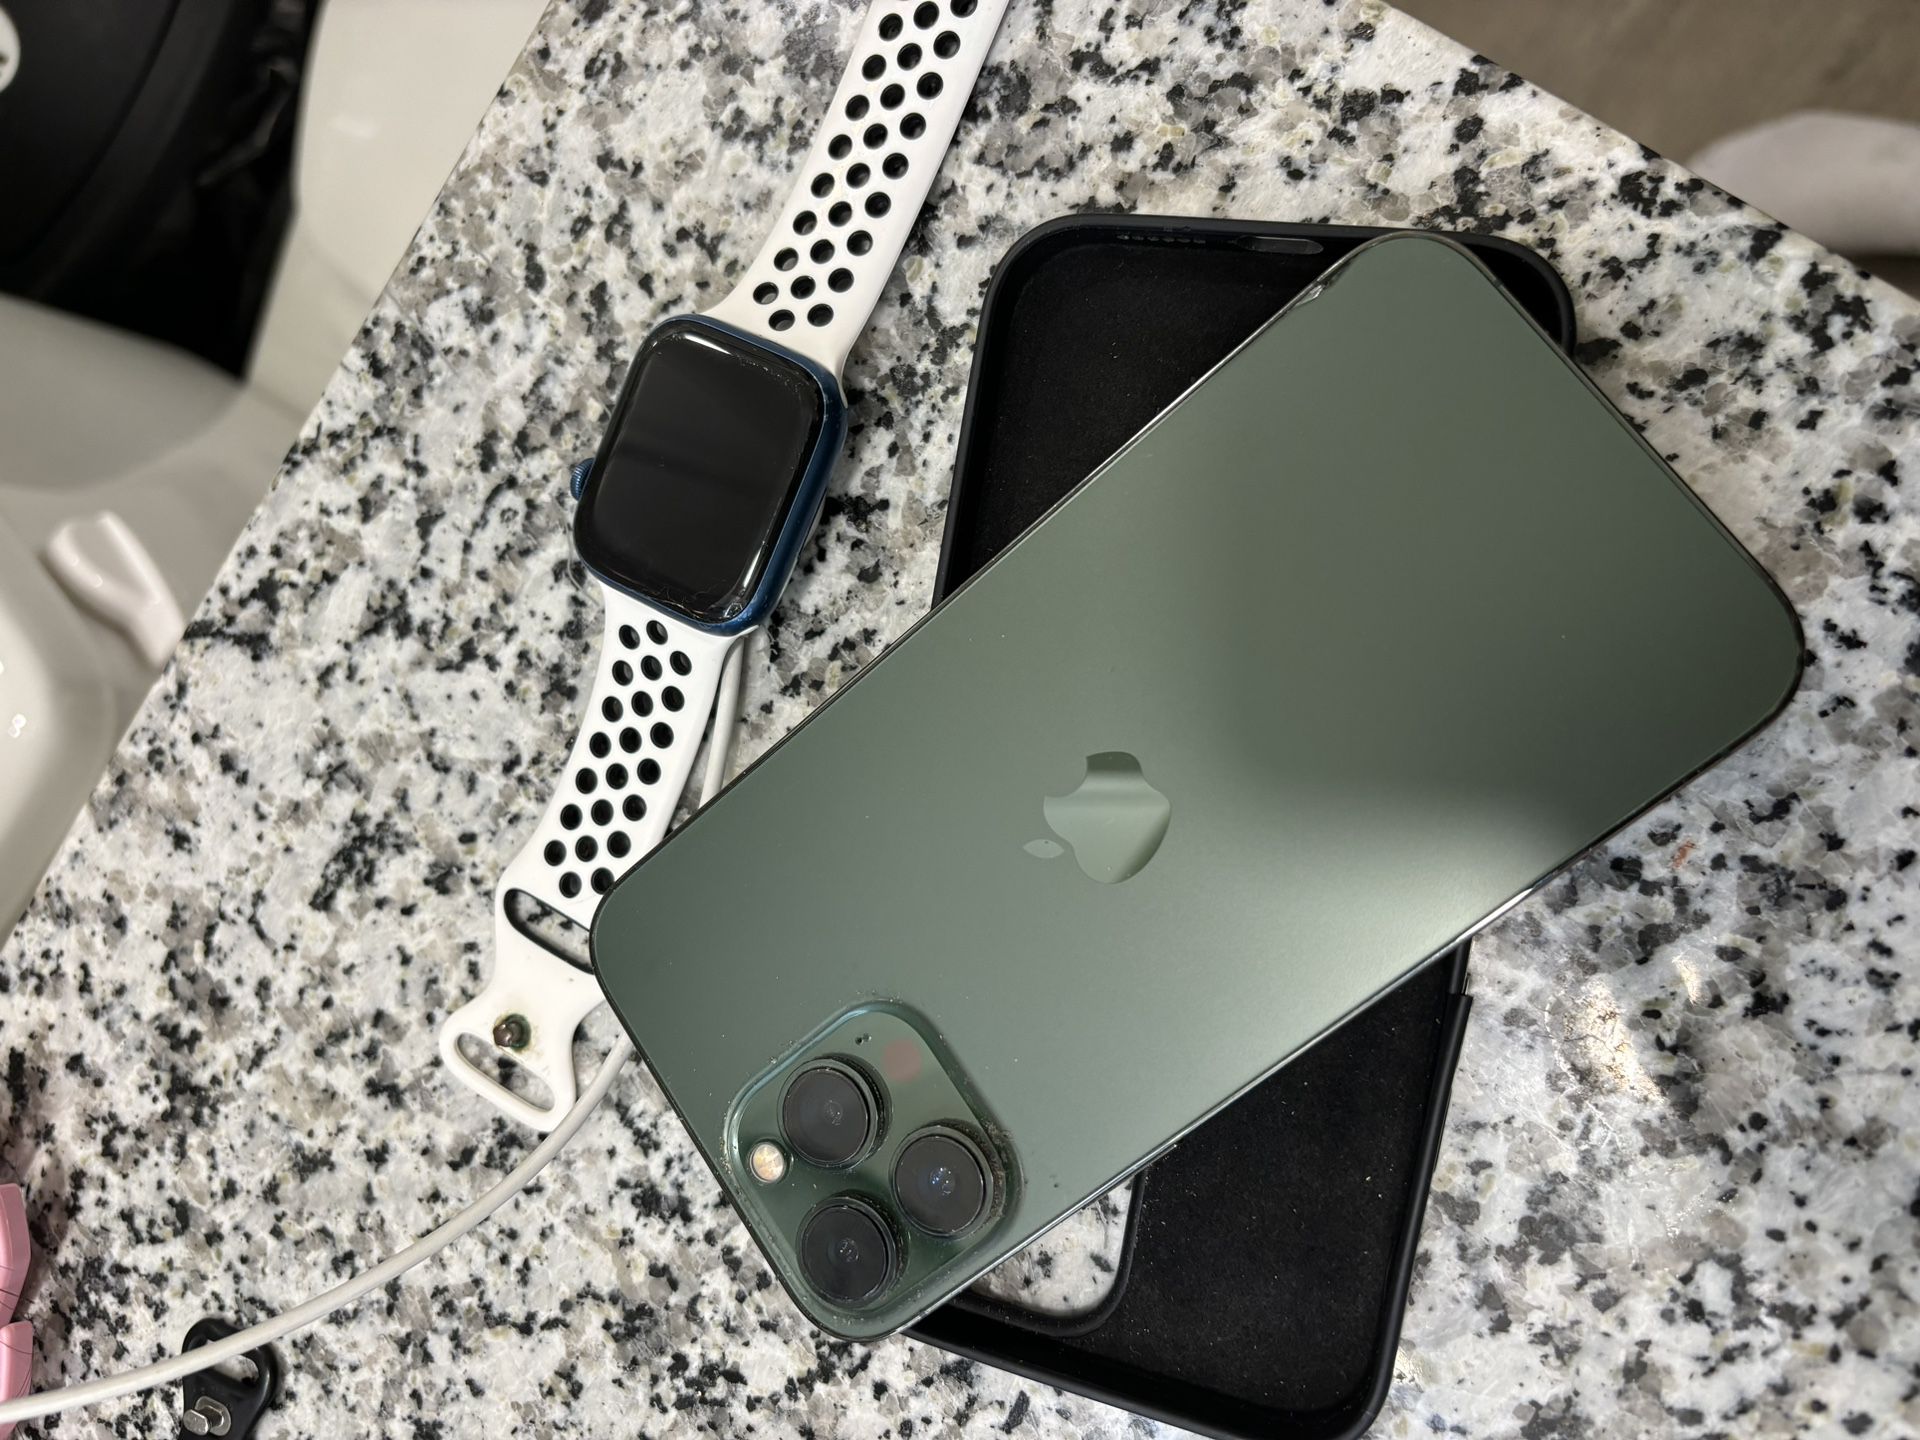 iPhone 13 Pro Max With Apple Watch Series 7 Combo